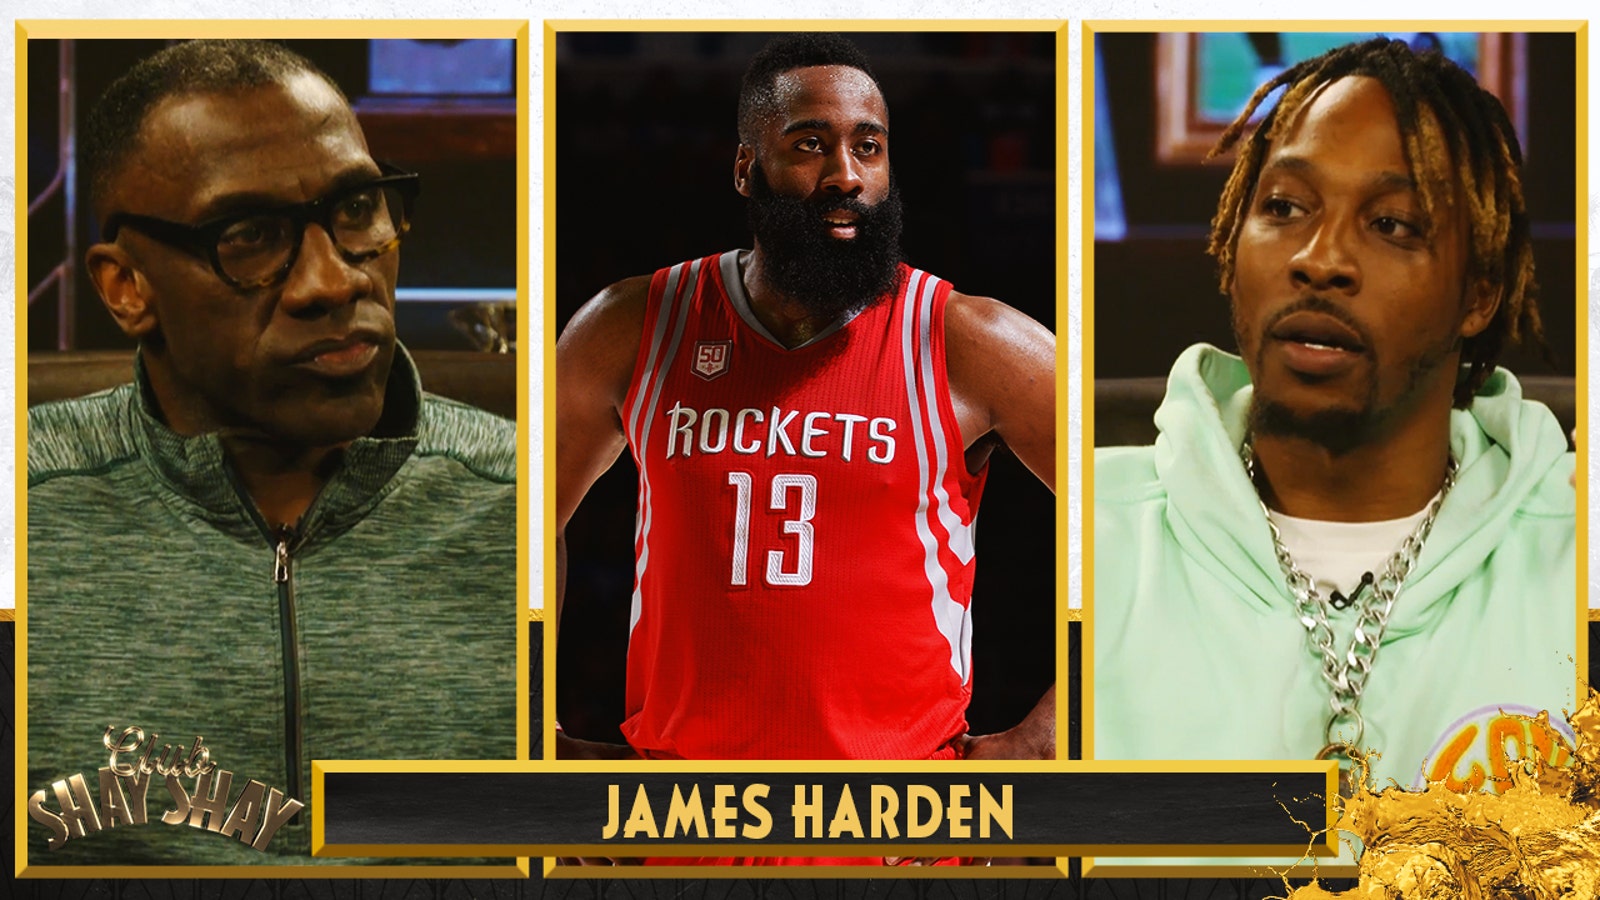 Beryl TV play-603b14551001099--James_Harden_1667857566279 James Harden reckons with his legacy, and how Joel Embiid is key Sports 